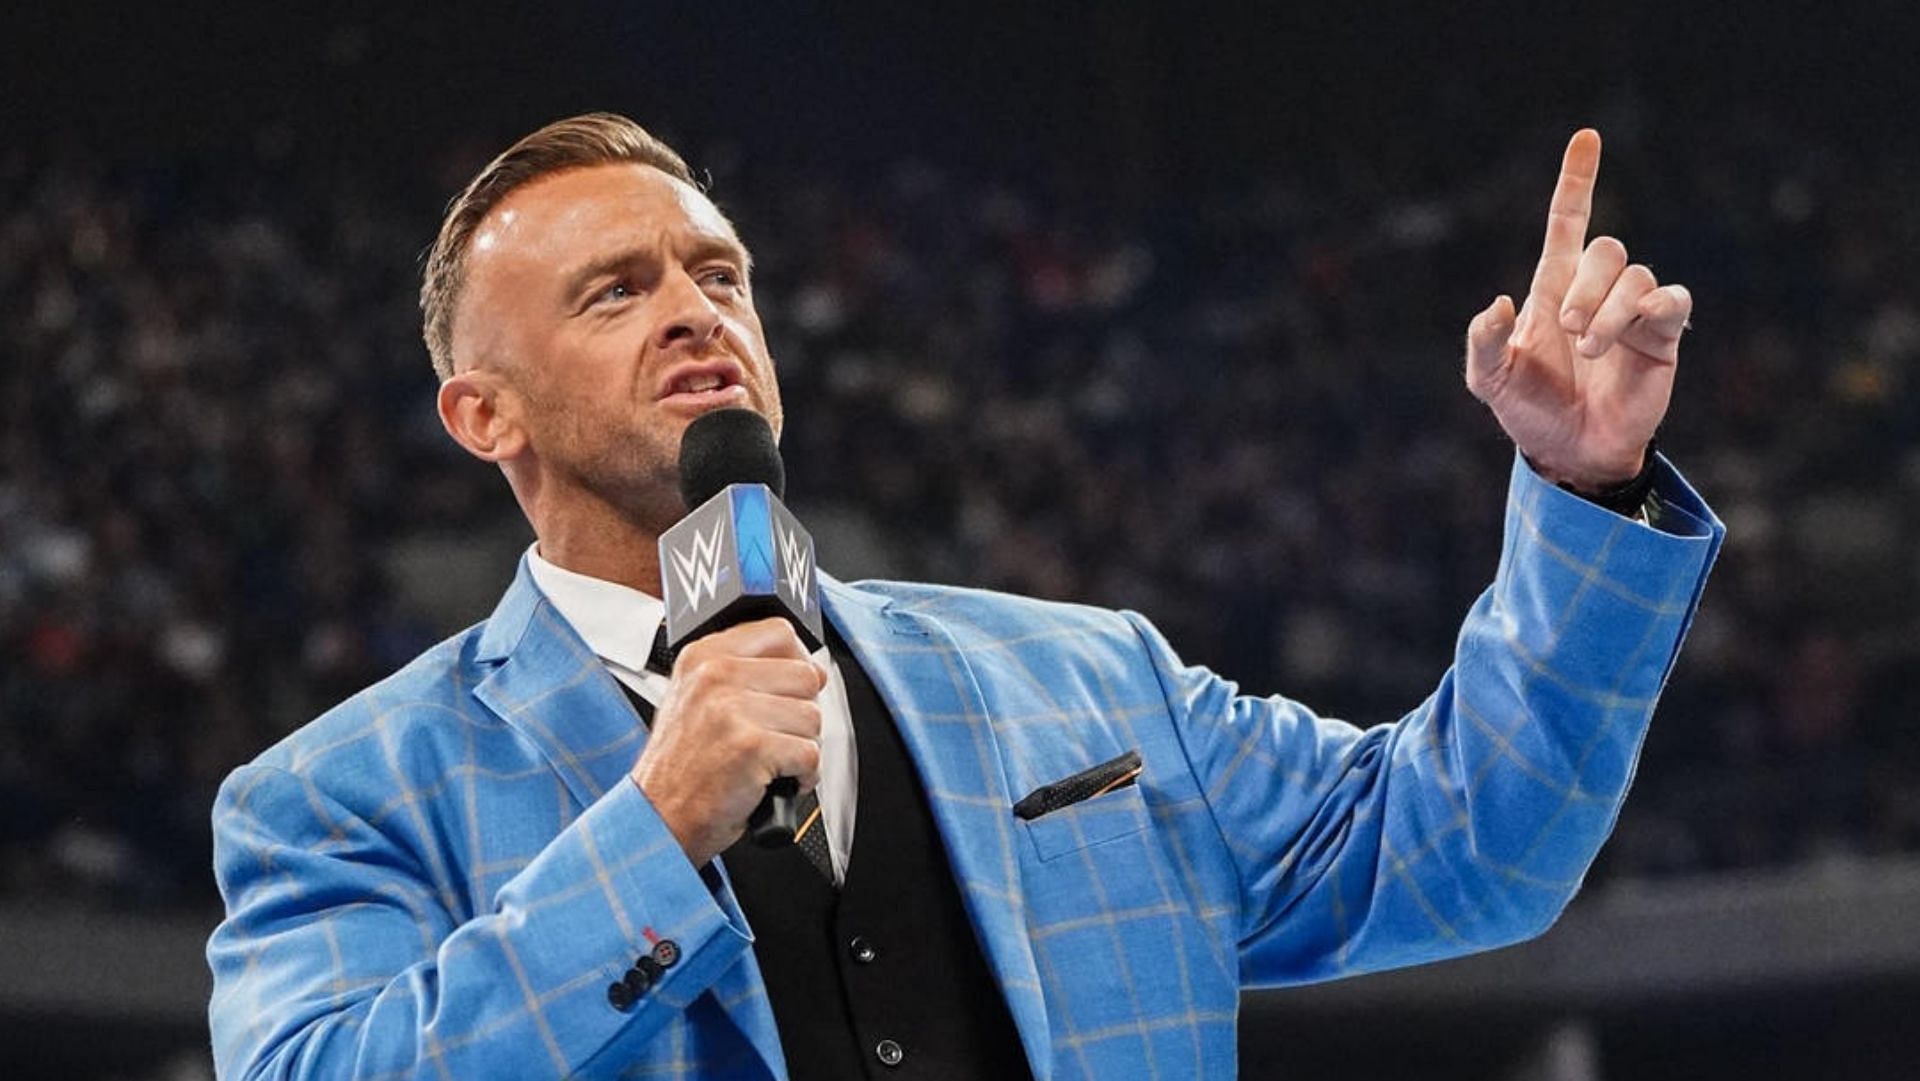 How has Nick Aldis fared as SmackDown GM? 